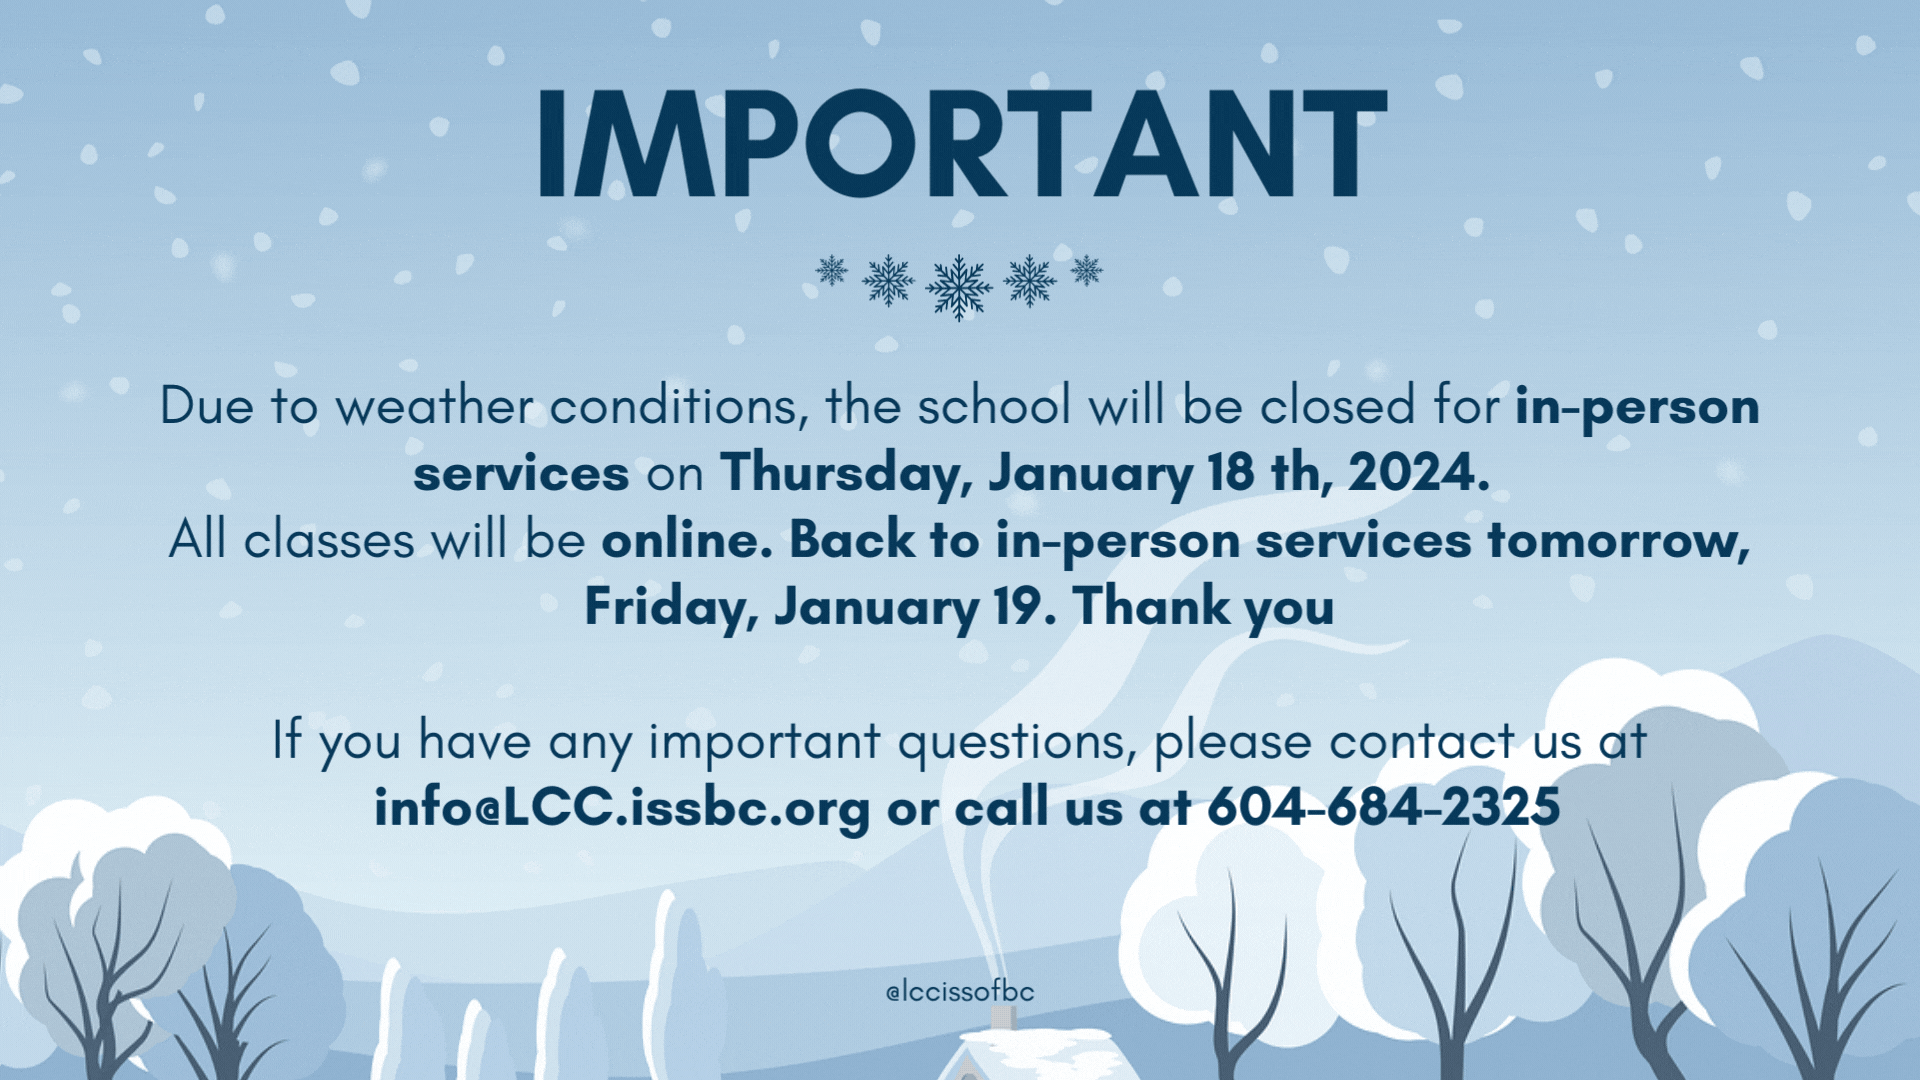 Due to weather conditions, the school will be closed for in-person services on Thursday, January 18 th, 2024.